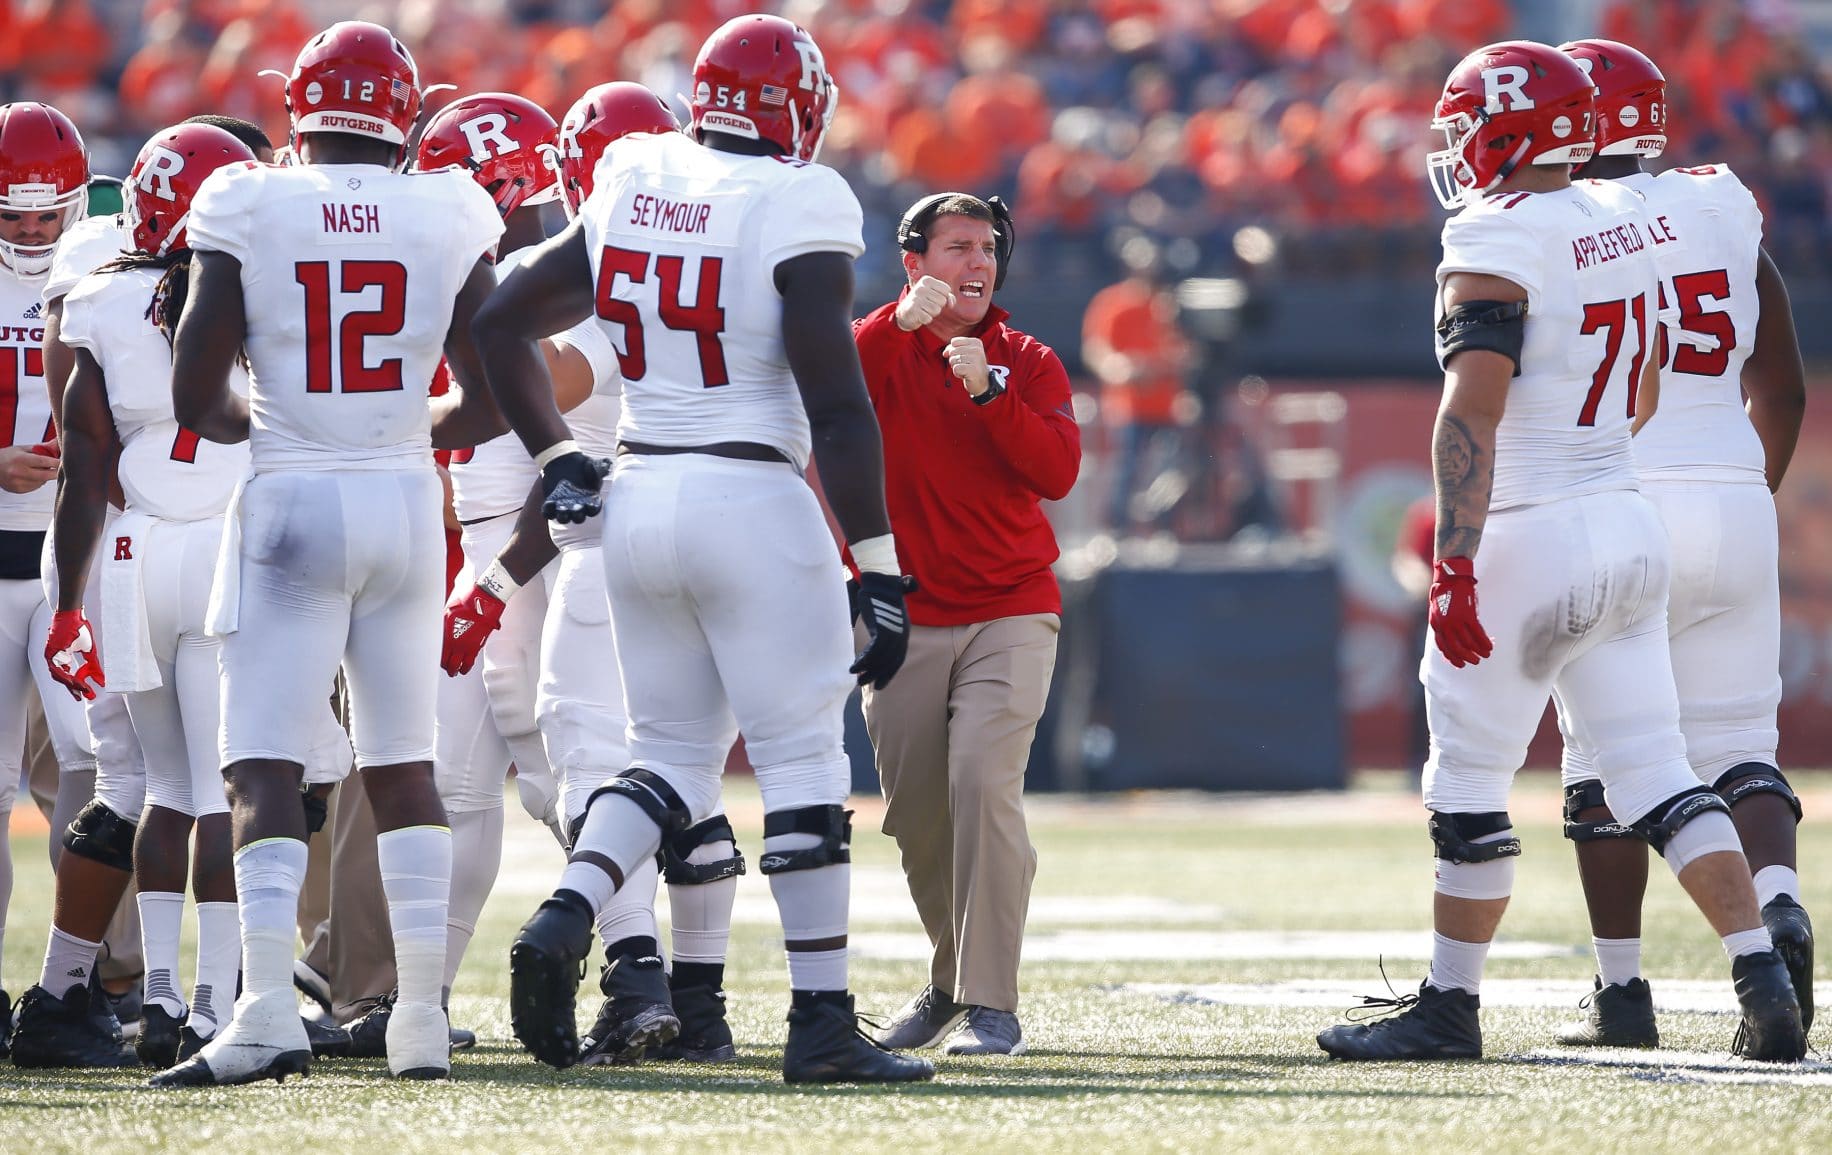 Rutgers Football Is Slowly But Steadily On the Rise 